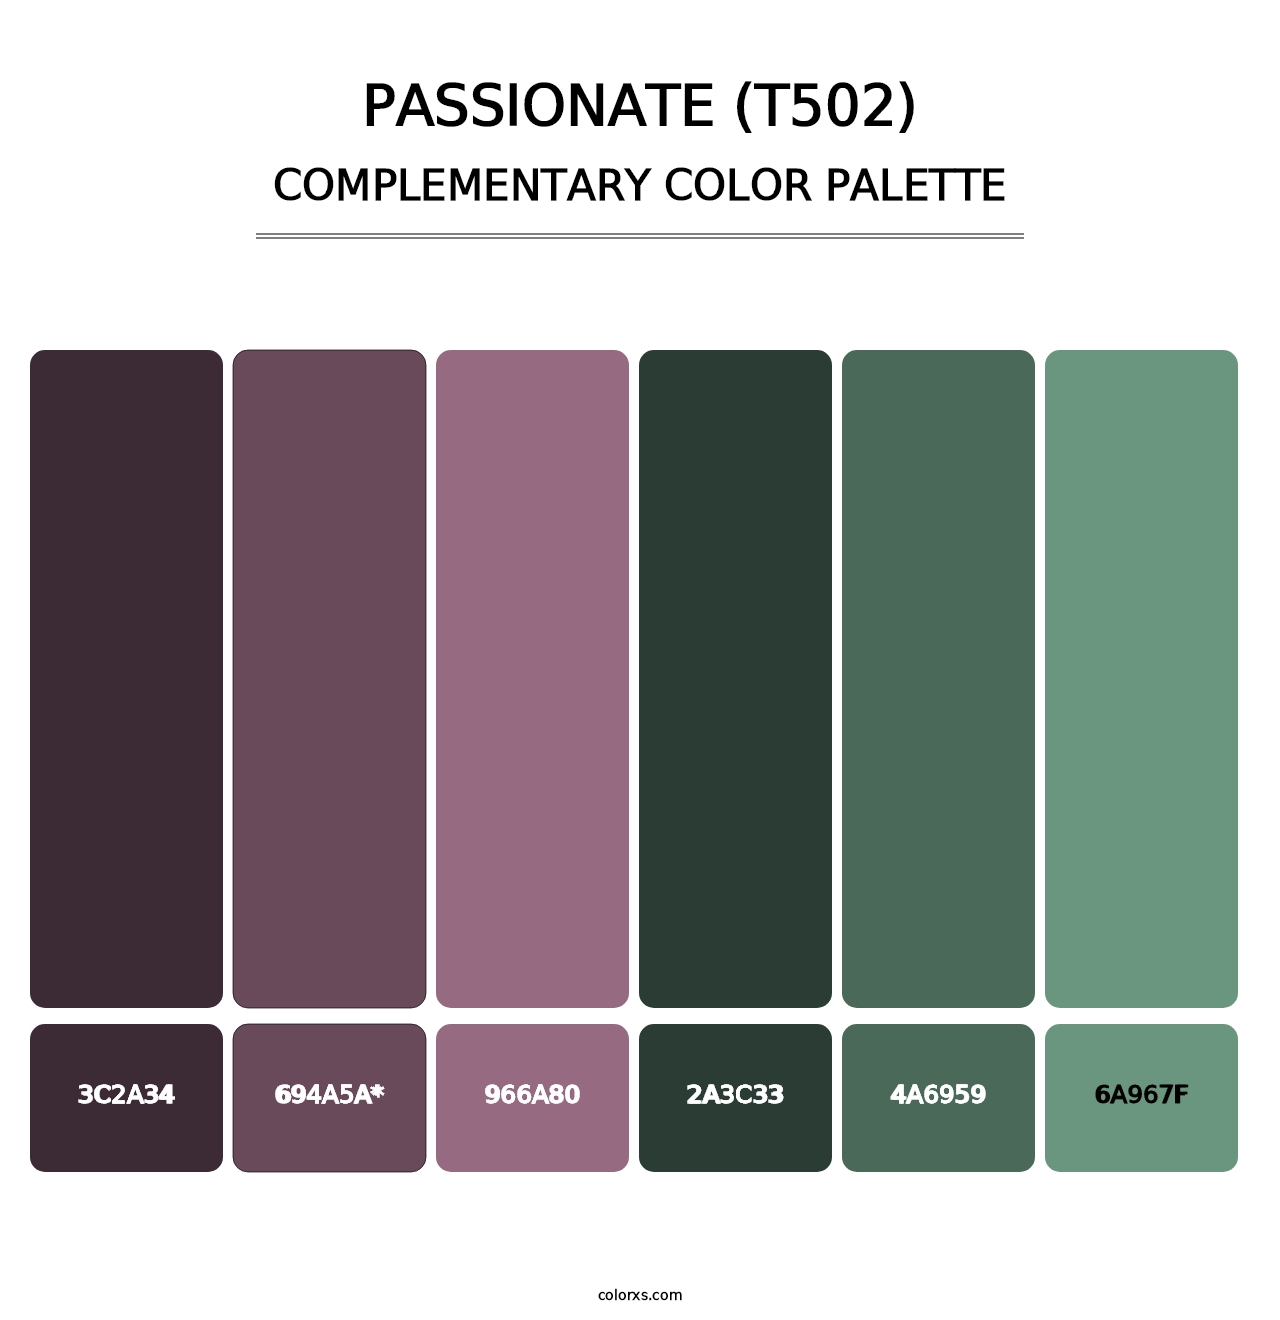 Passionate (T502) - Complementary Color Palette